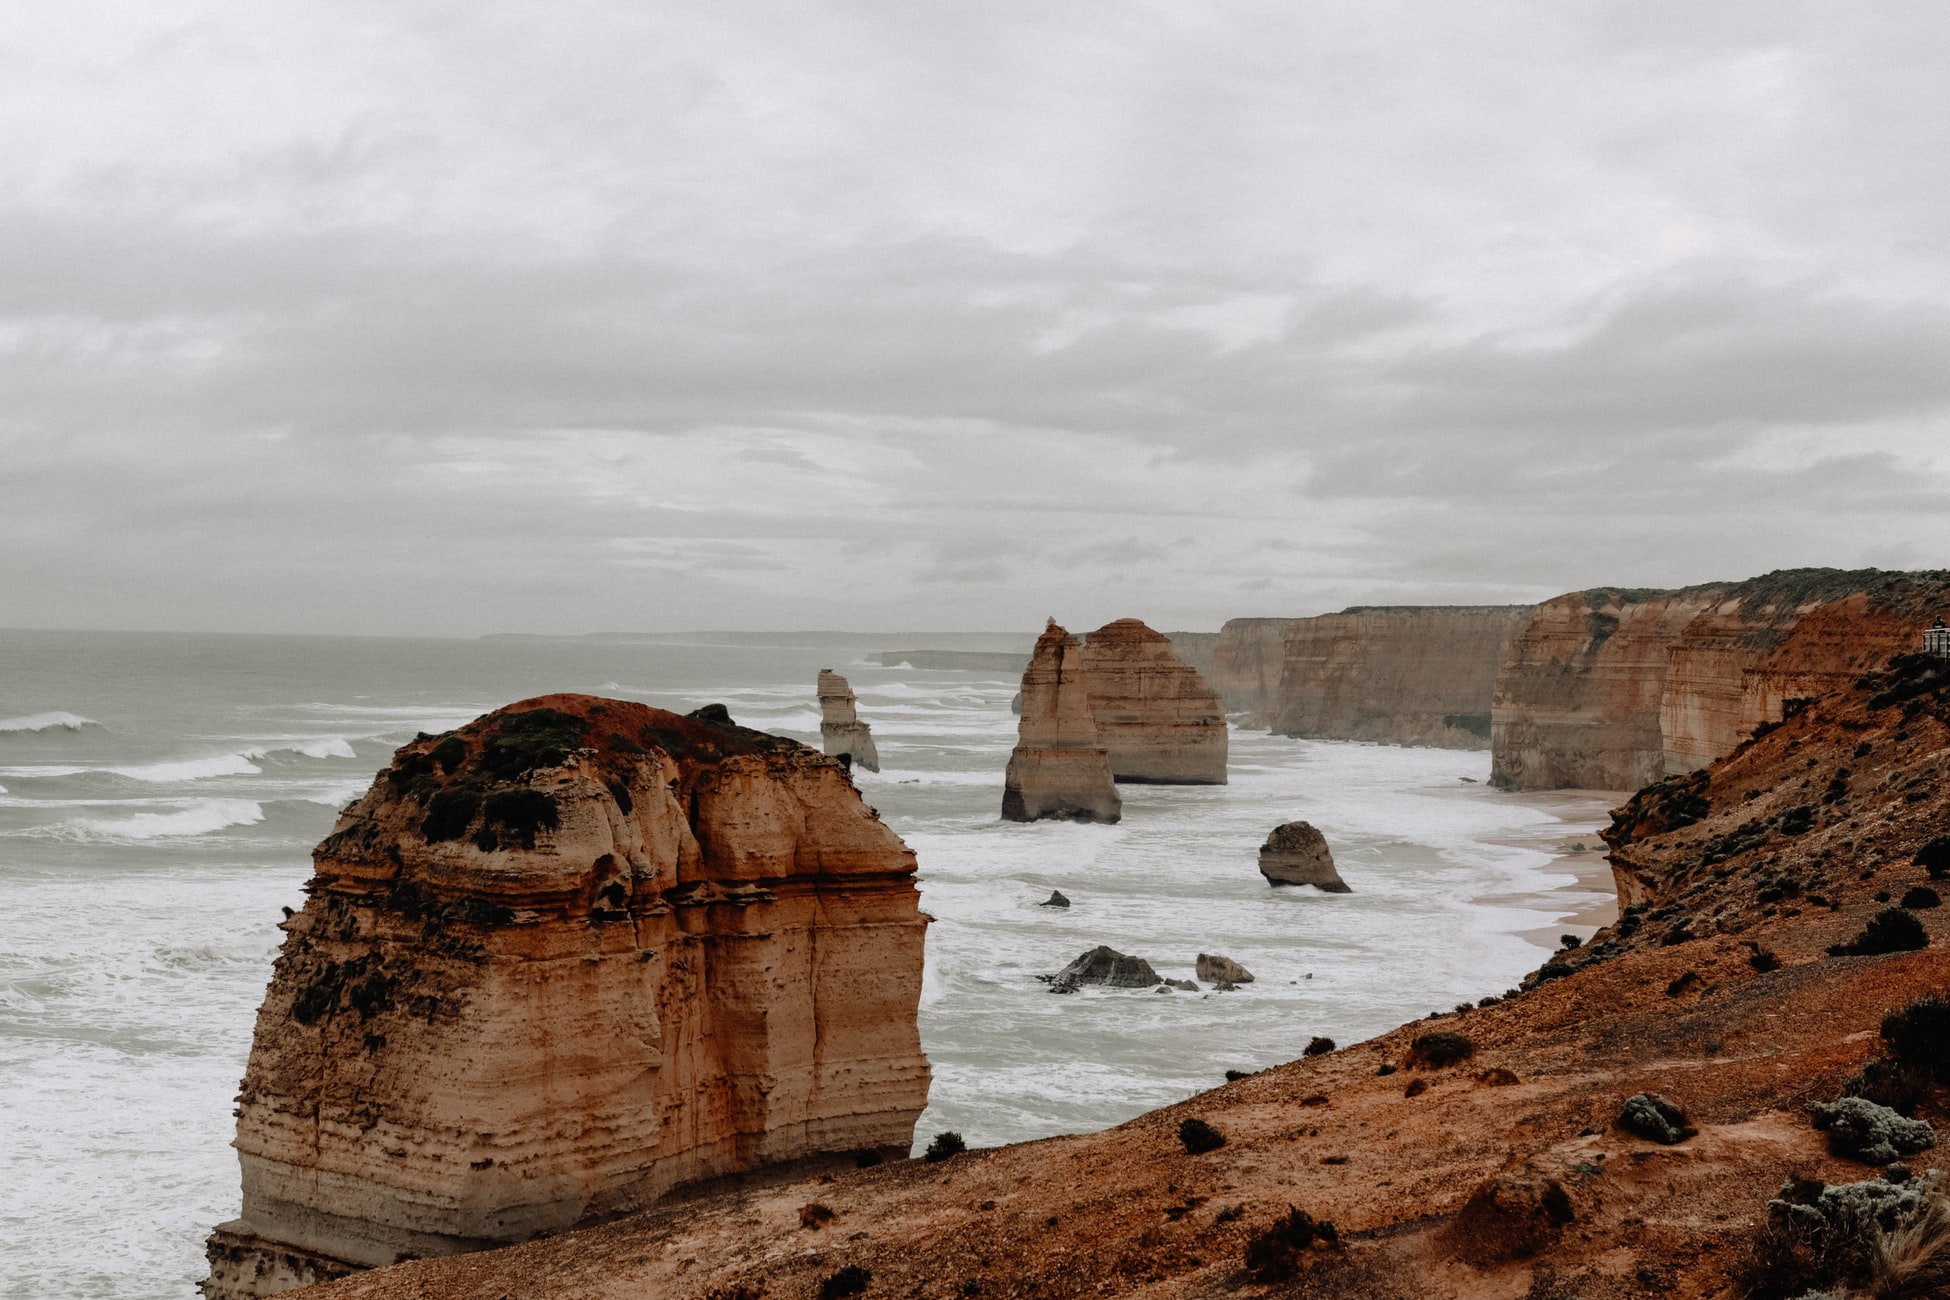 Should you visit the Great Ocean Road during winter?